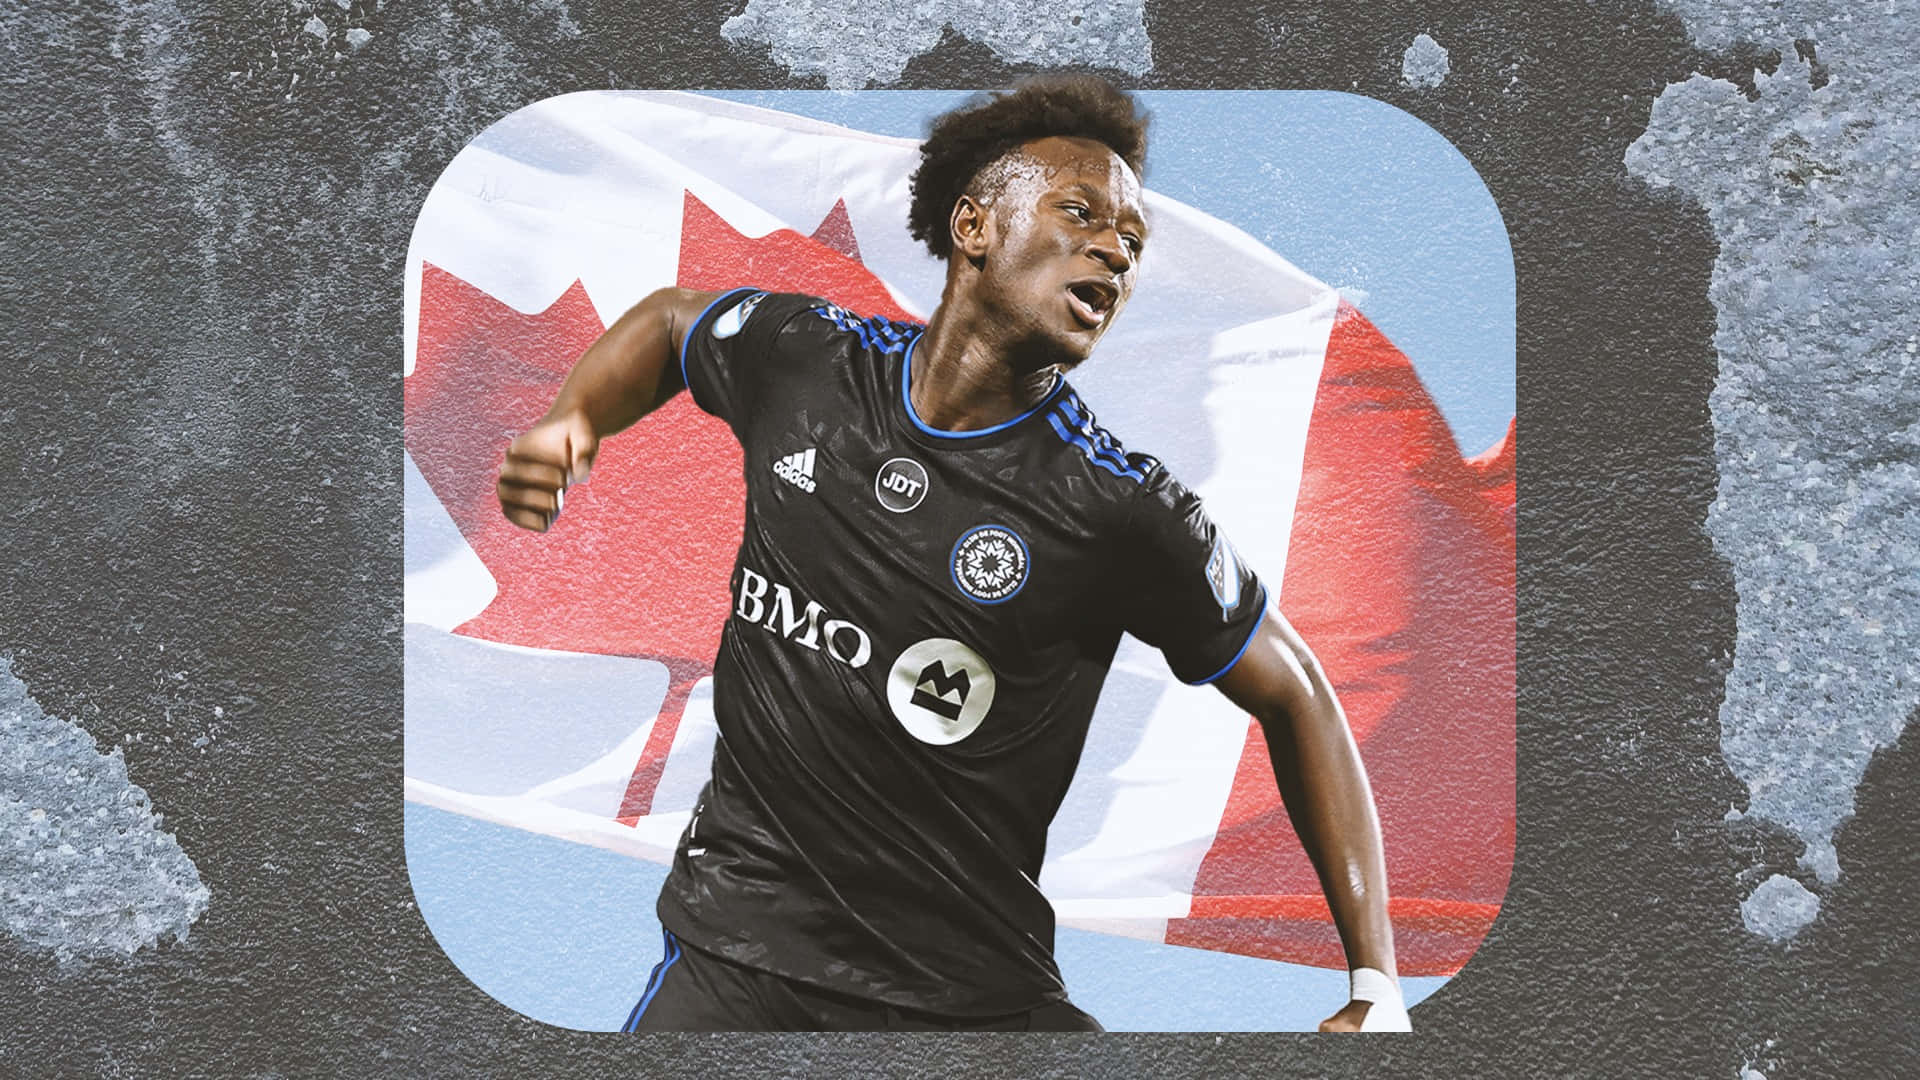 Ismaël Koné Playing For Cf Montréal And Canada Background